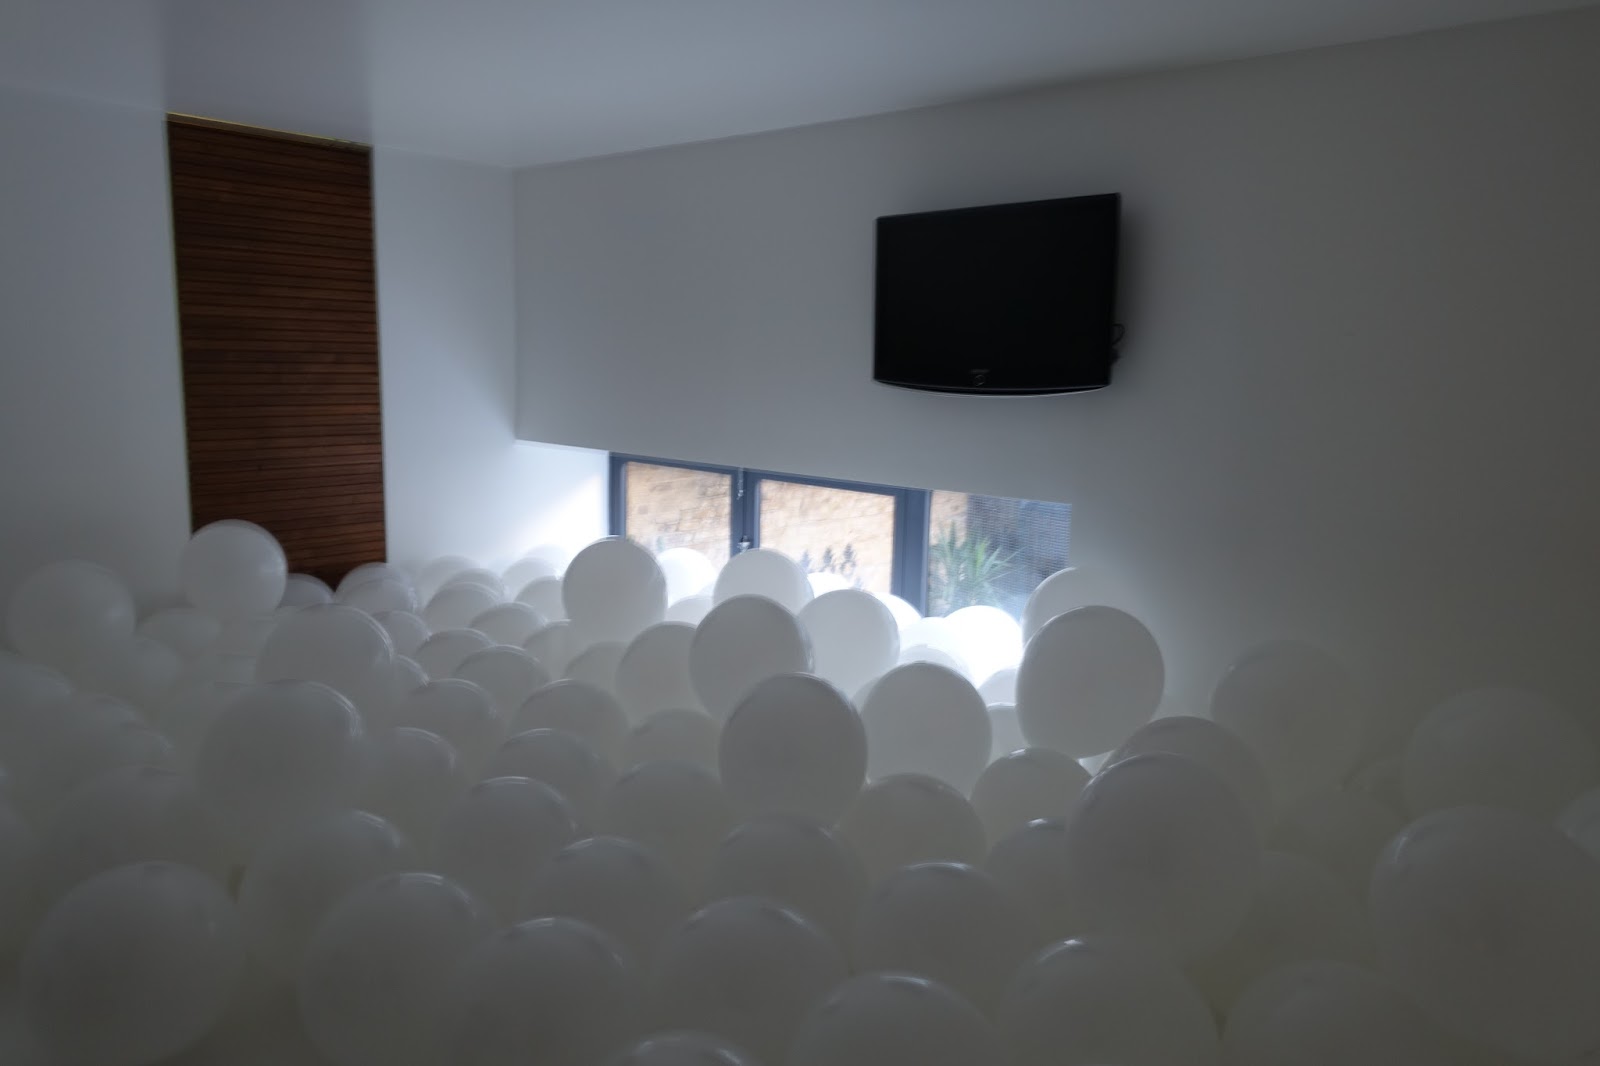 The Very Best Balloon Blog: Getting Your Head Around Balloon Formulas How Many Balloons To Fill A Room